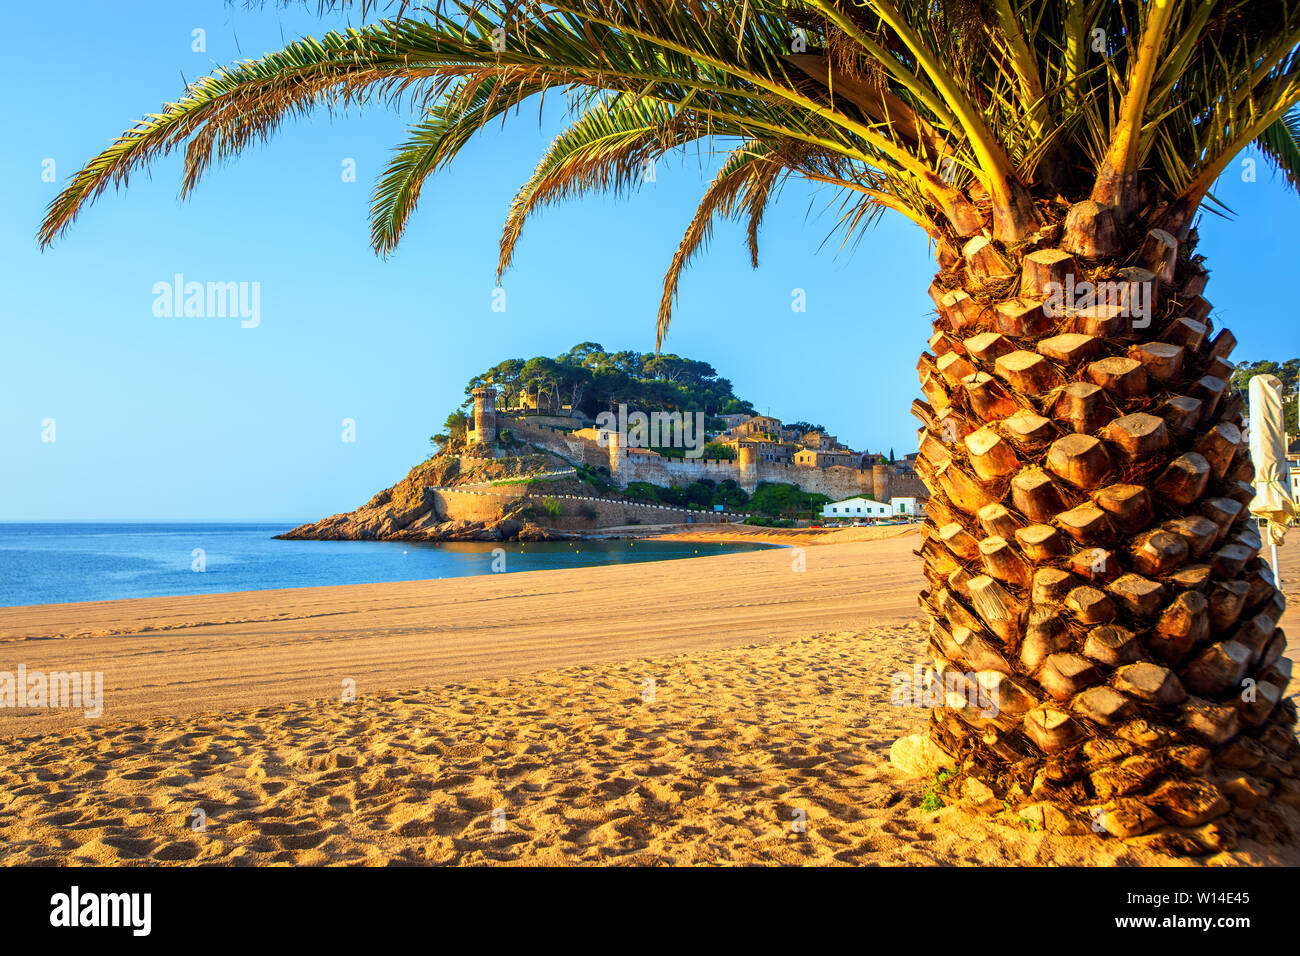 Tossa de Mar, view of the Platja Gran sand beach with palm tree and the historical walled Old Town (Vila Vella). Costa Brava, Catalonia, Spain. Stock Photo